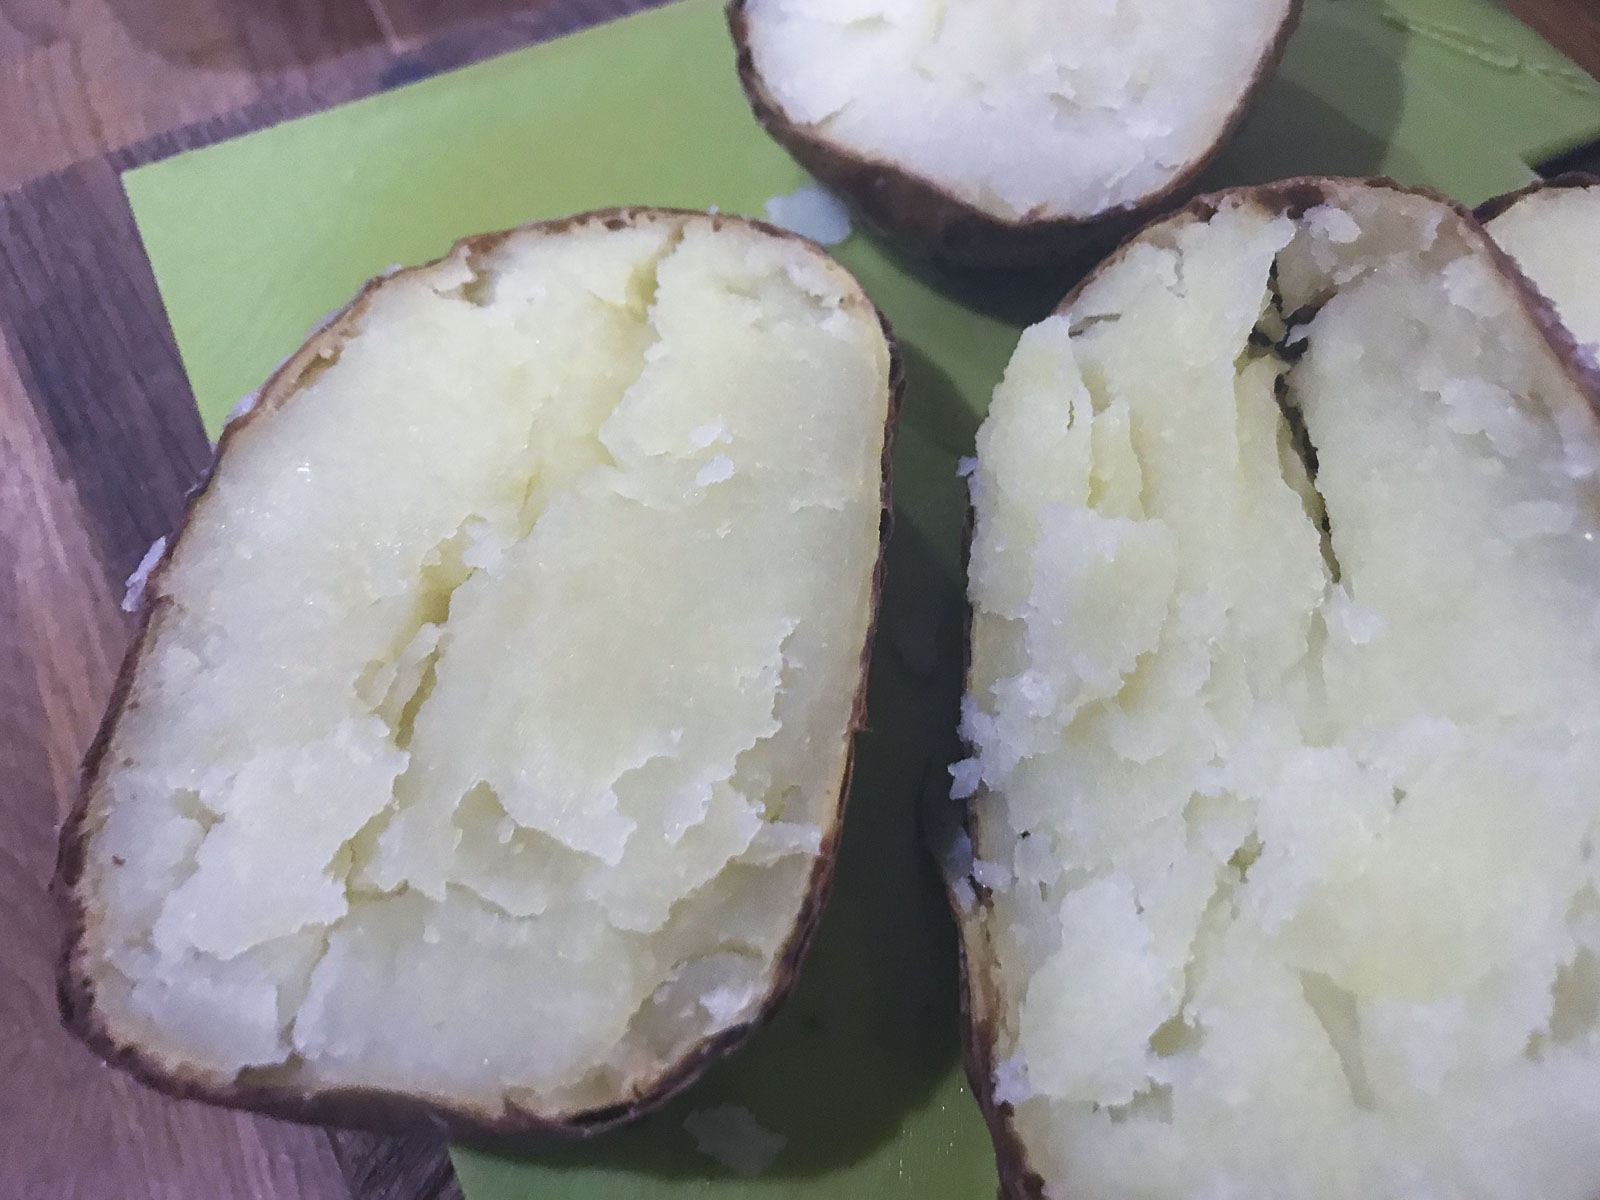 Baked potatoes sliced in half from the oven on a wooden chopping board.